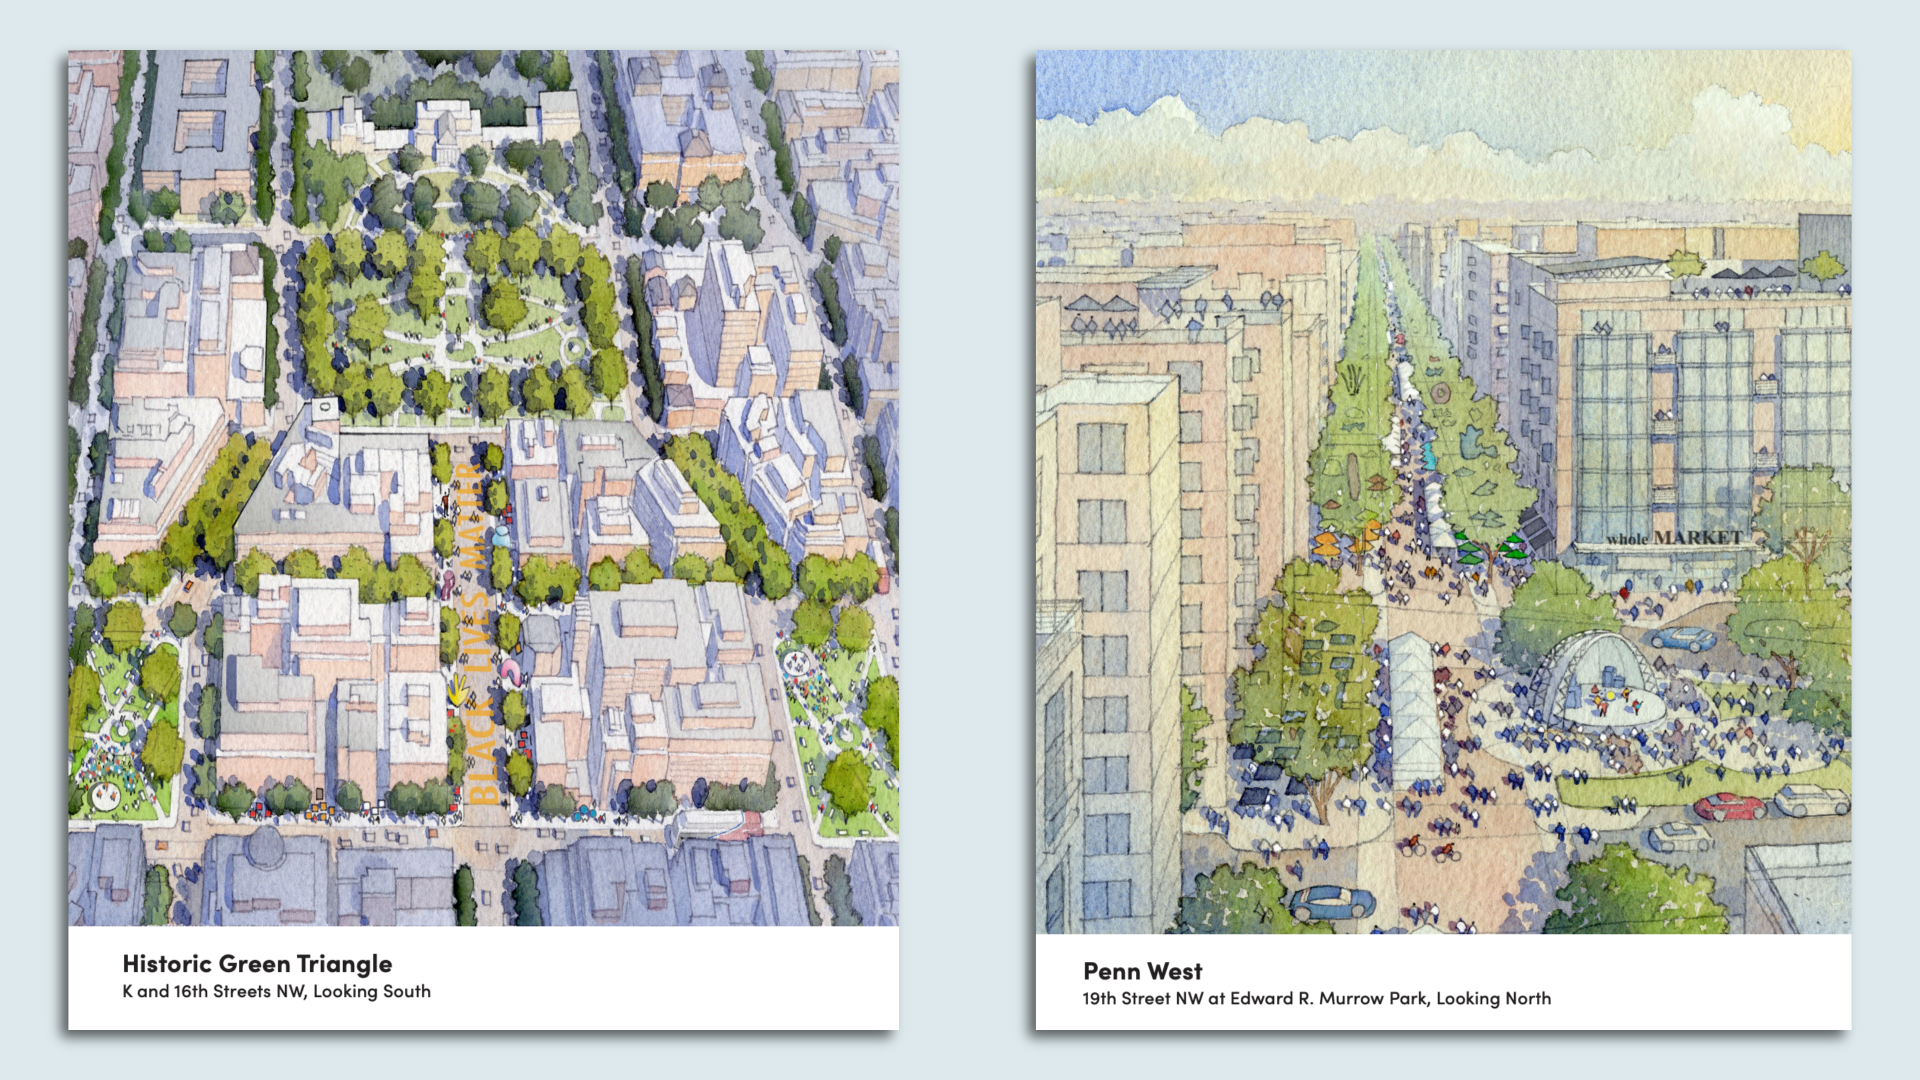 Renderings showing more pedestrian spaces and greenery on downtown corridors